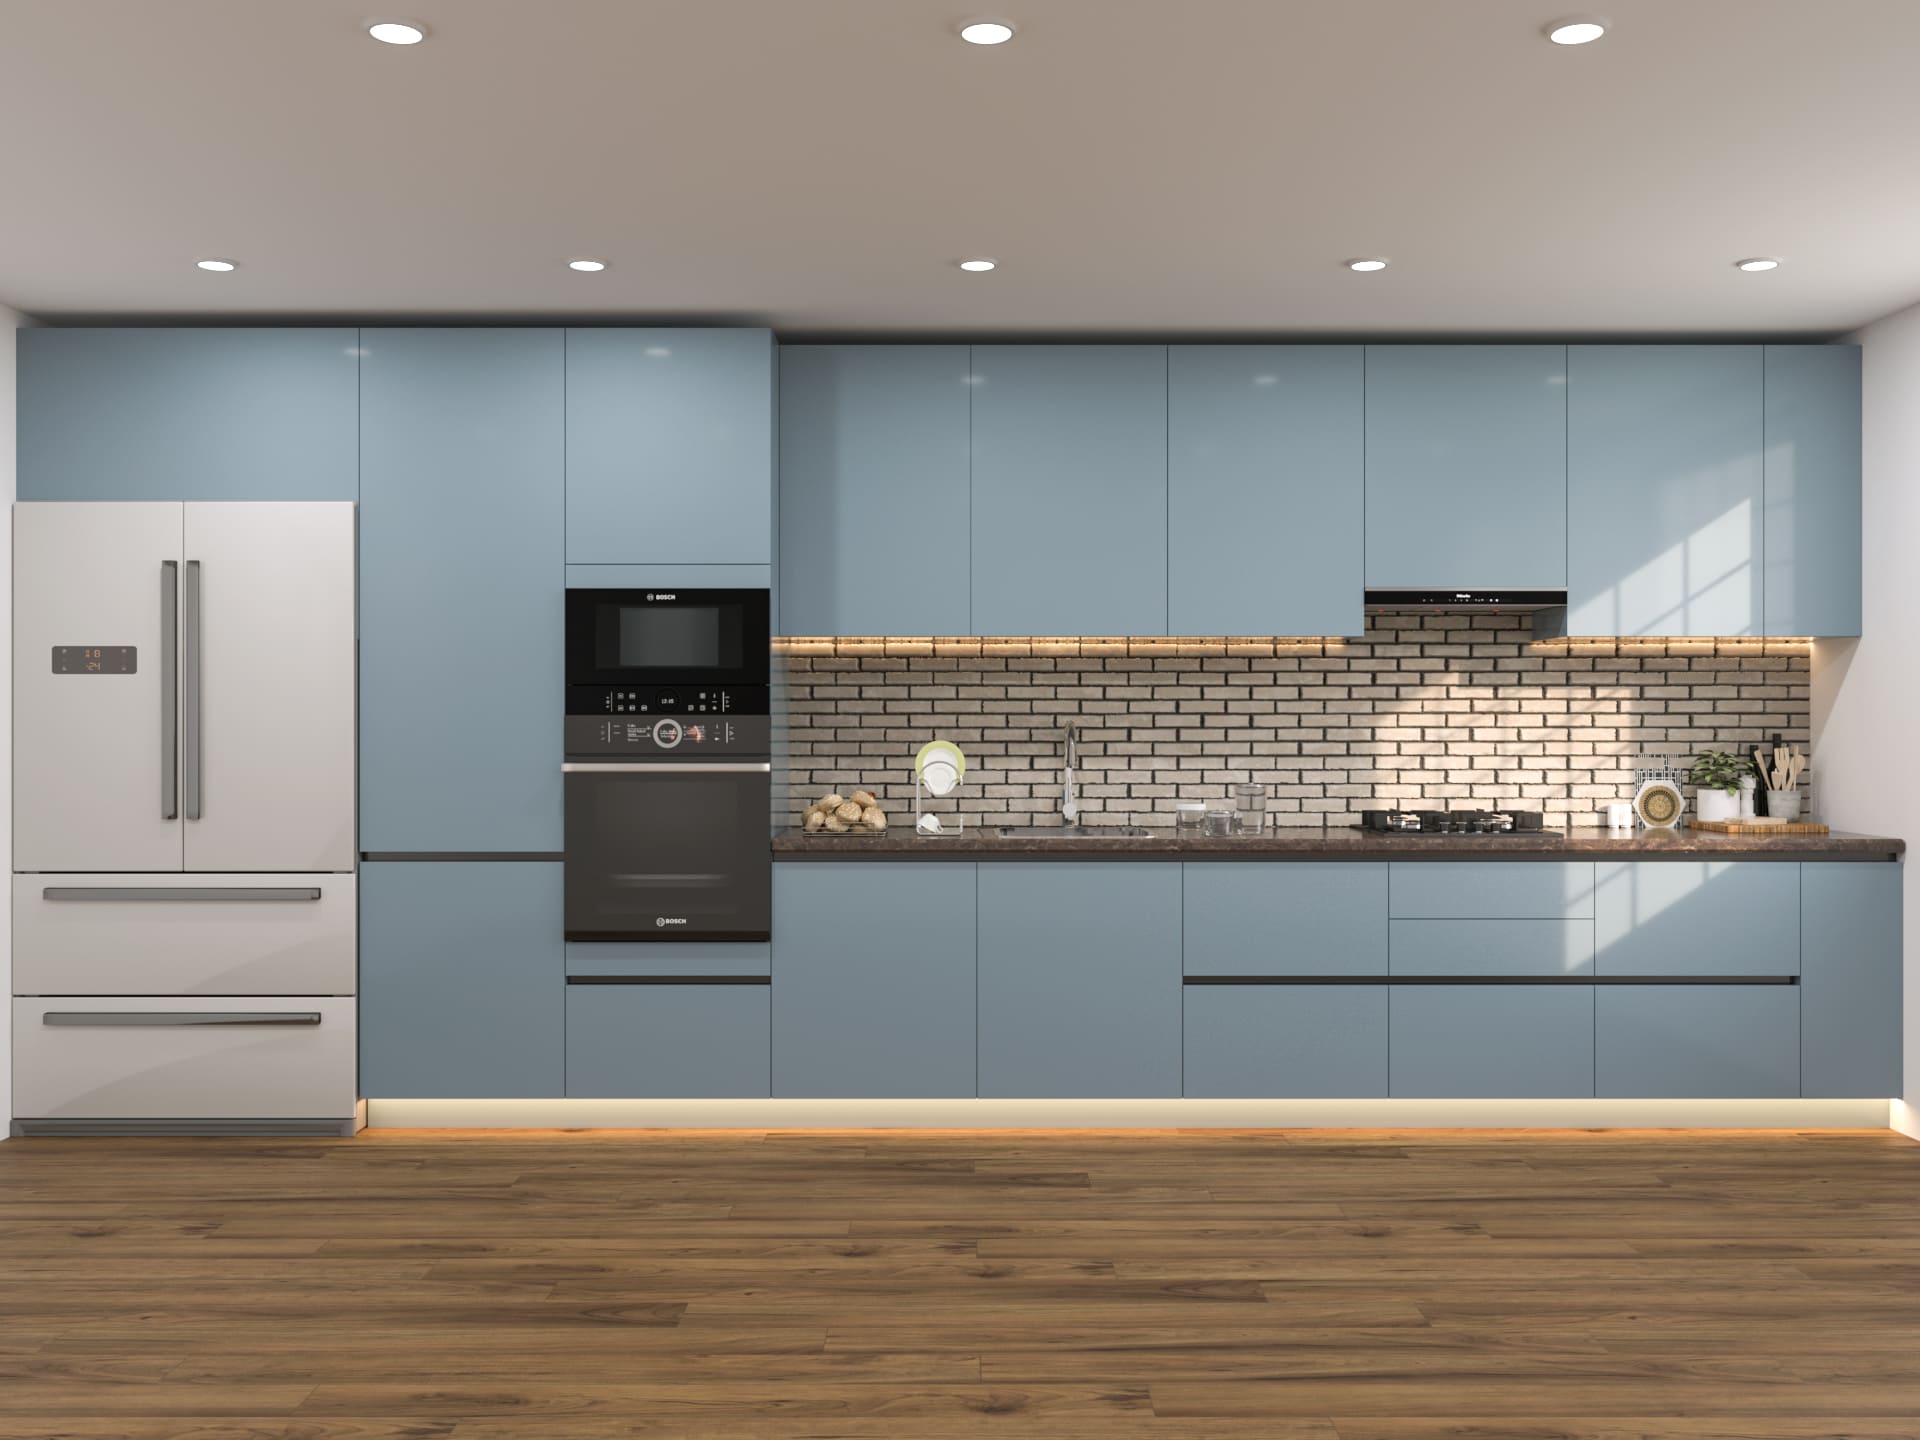 blue cooking ،e with cabinets, cupboards, appliances and brown wooden flooring